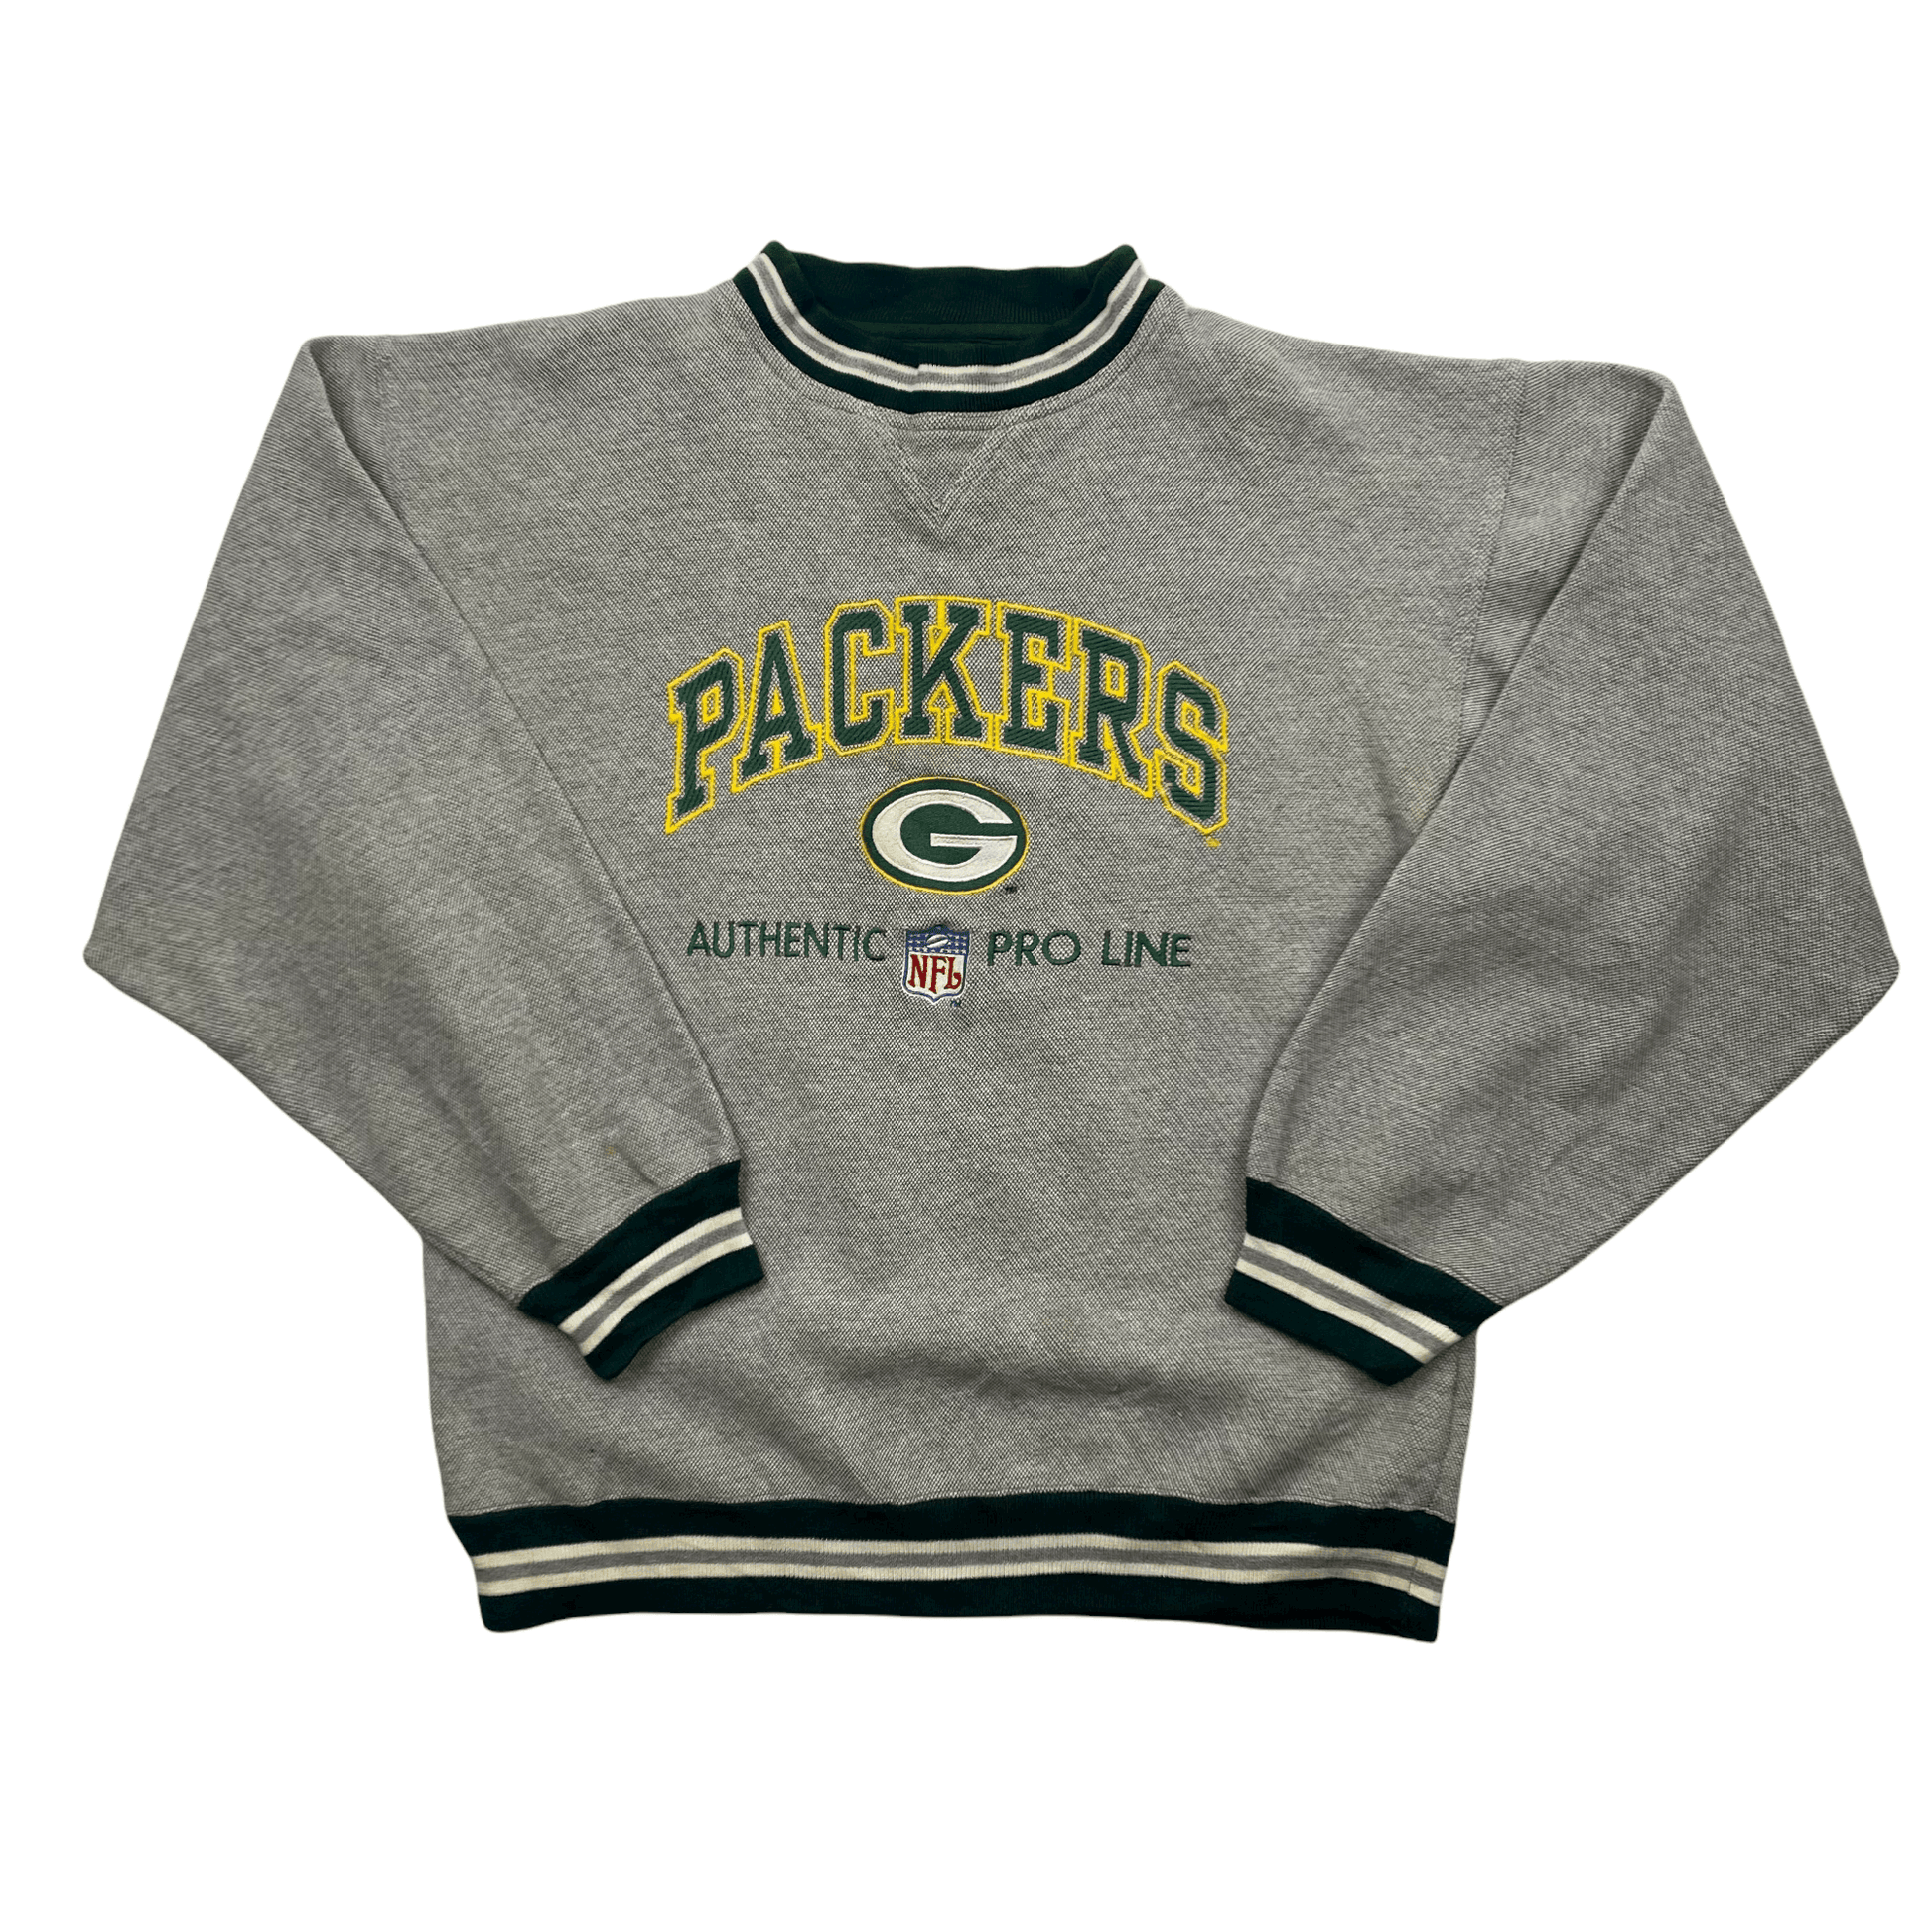 Vintage 90s Grey Green Bay Packers NFL Spell-Out Sweatshirt - Large